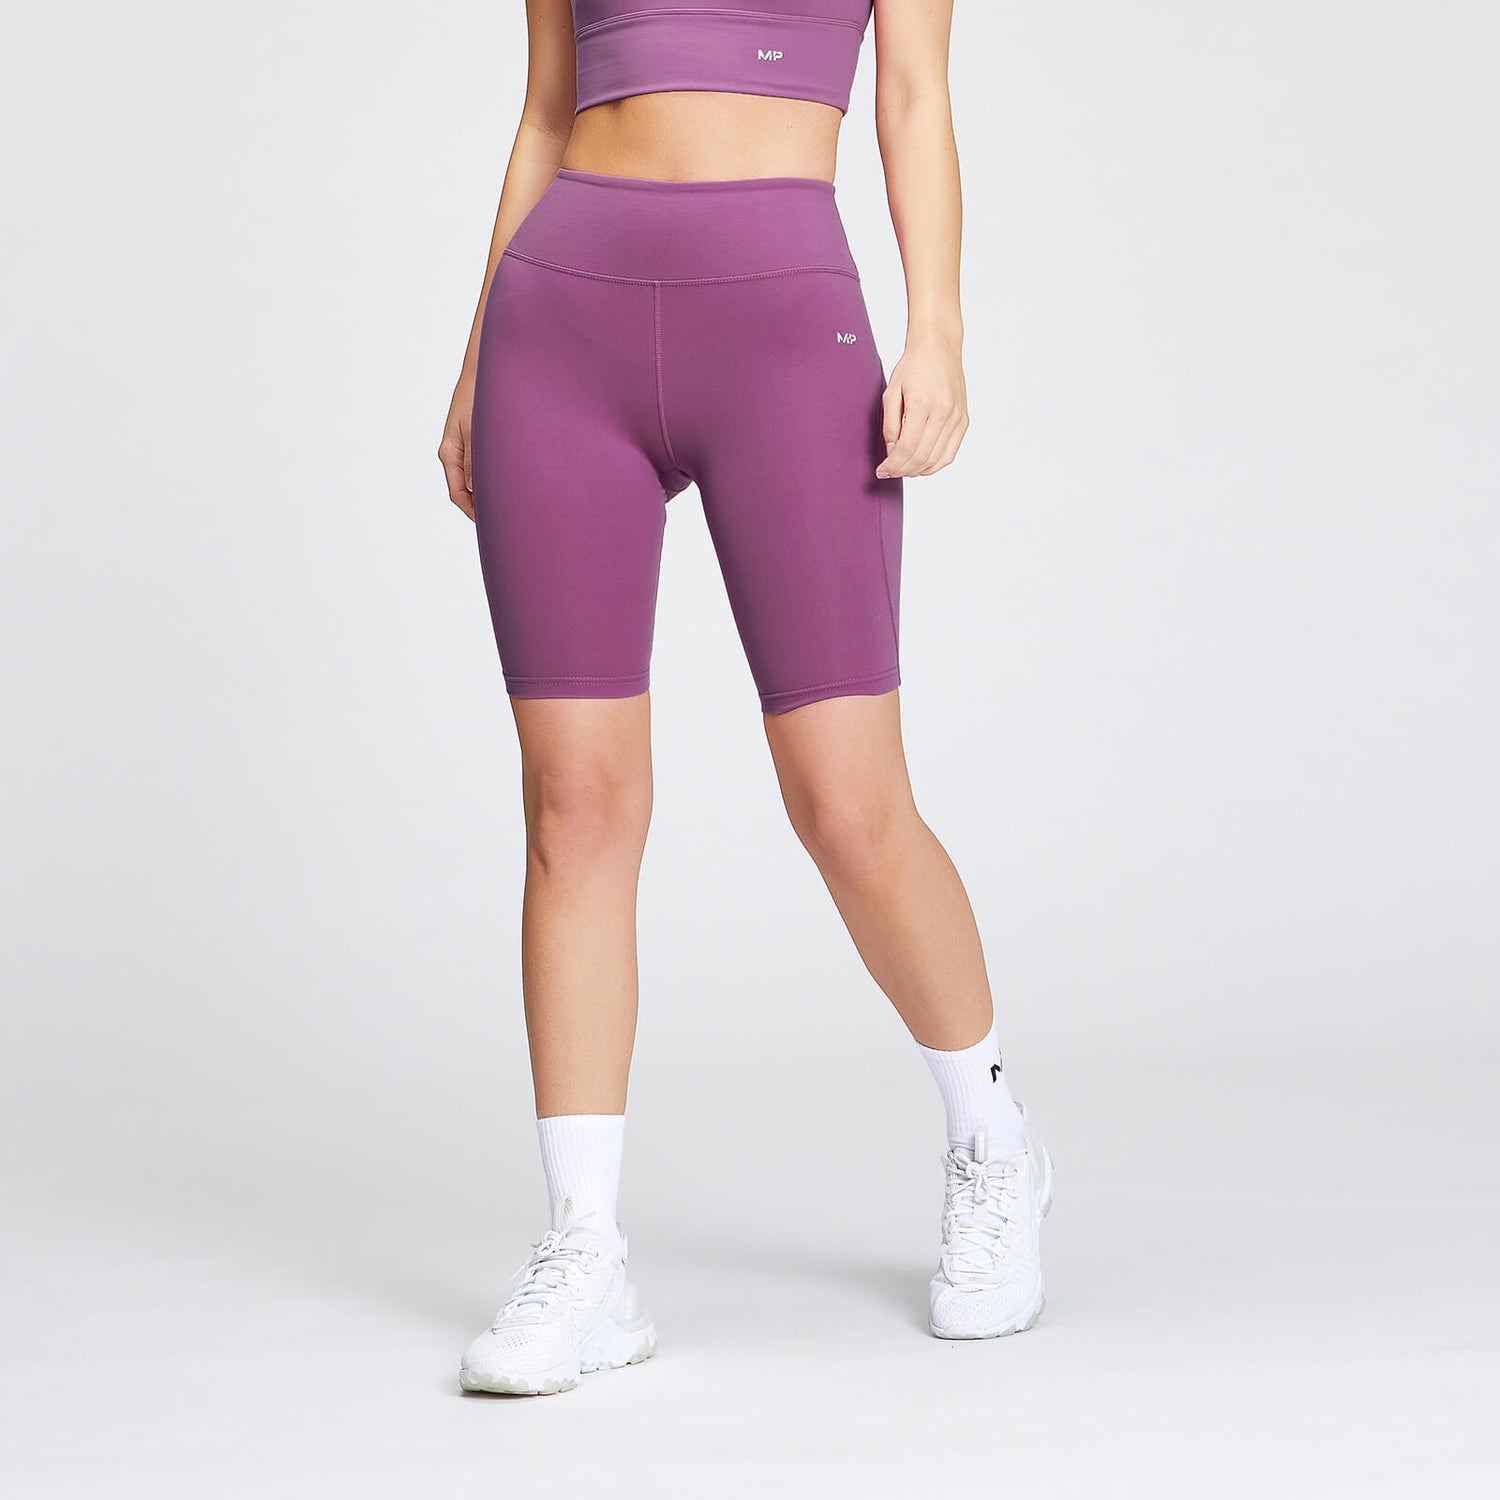 MP Women's Power Cycling Shorts - Orchid - M